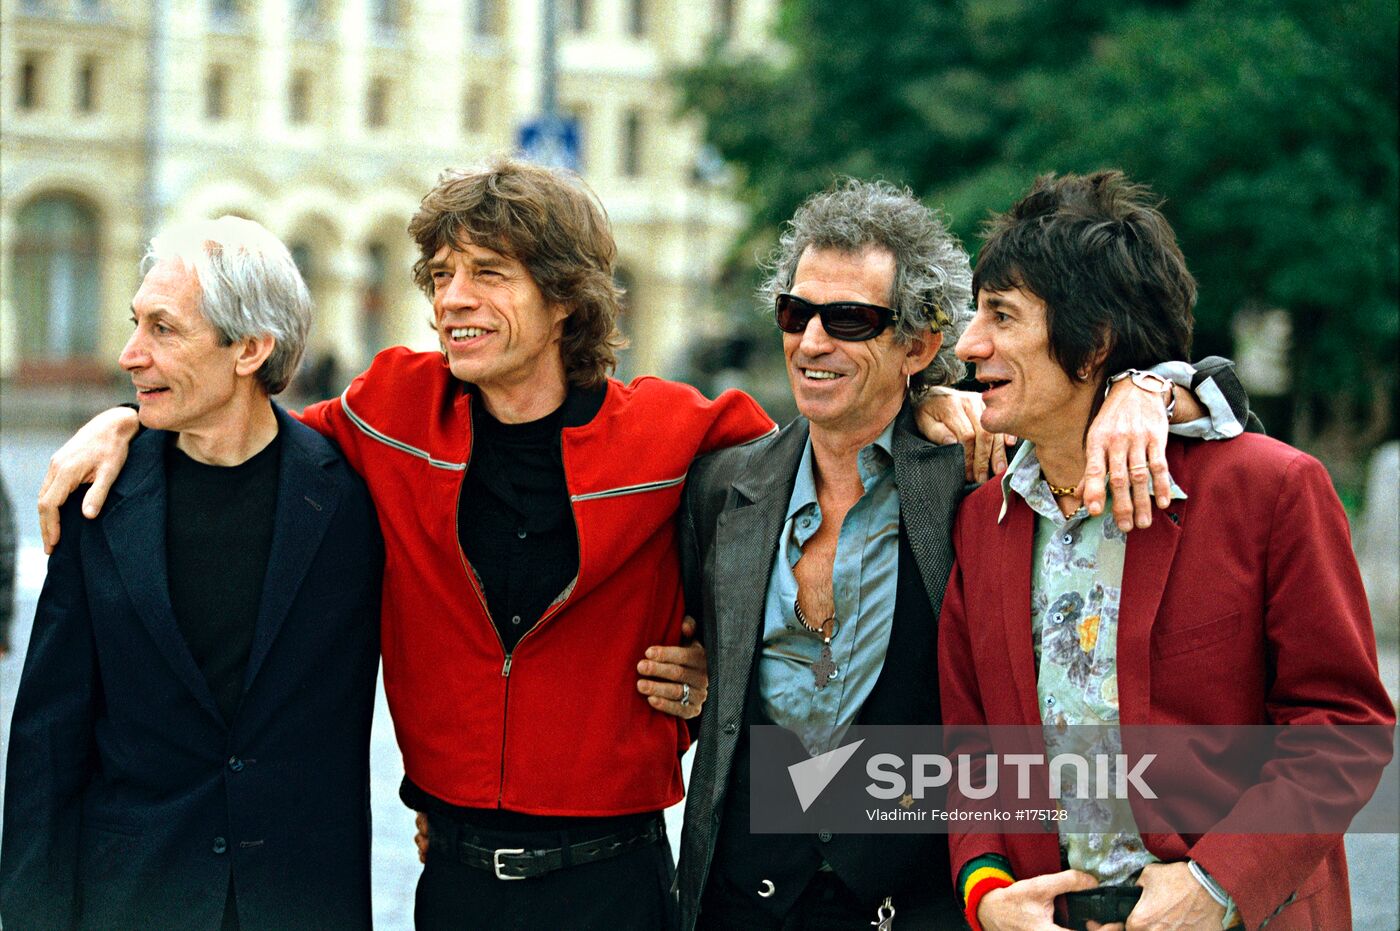 Rolling stones, rock group, Moscow